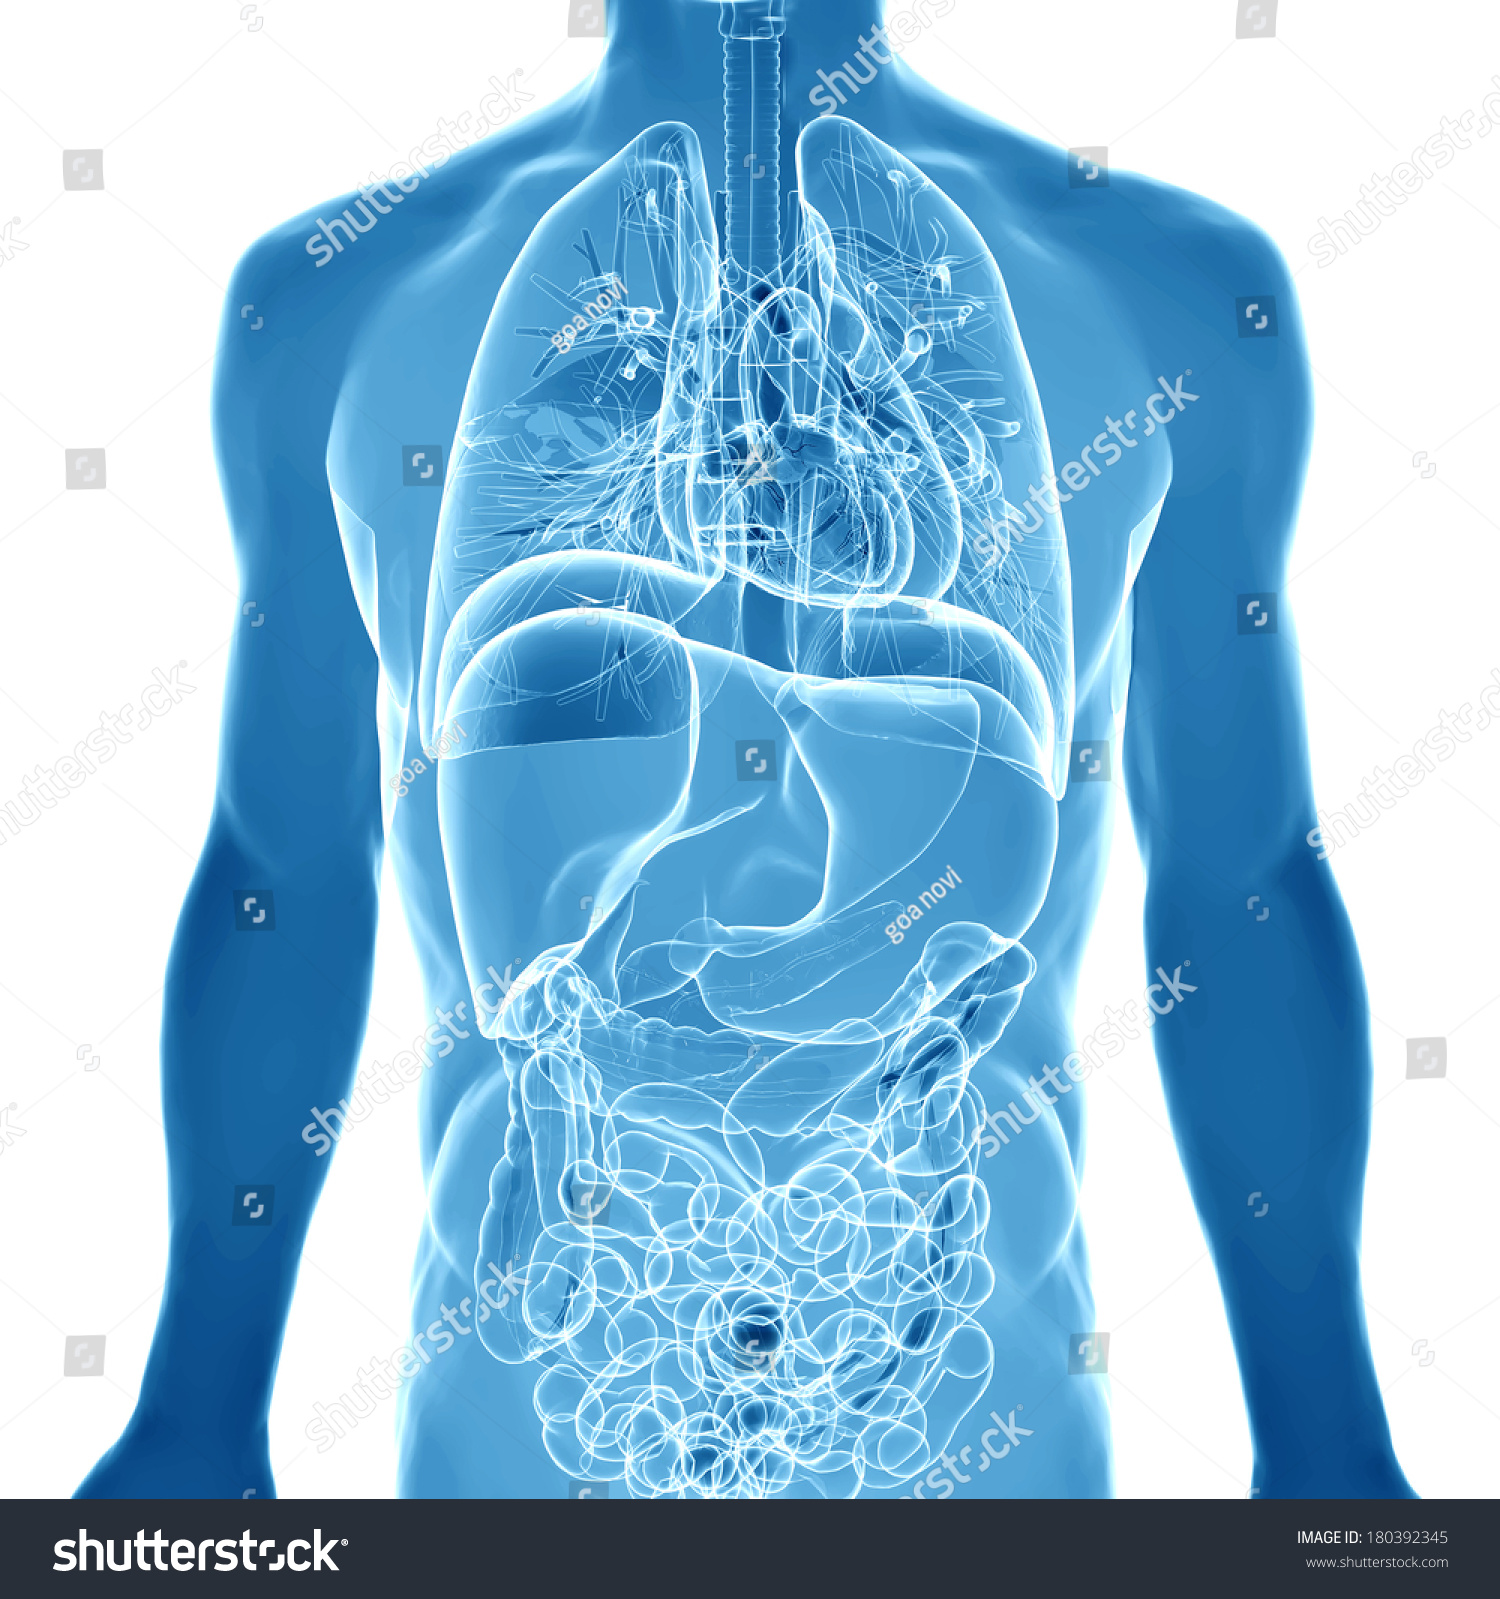 3d Render Depicting The Internal Organs Of The Human Body Stock Photo ...